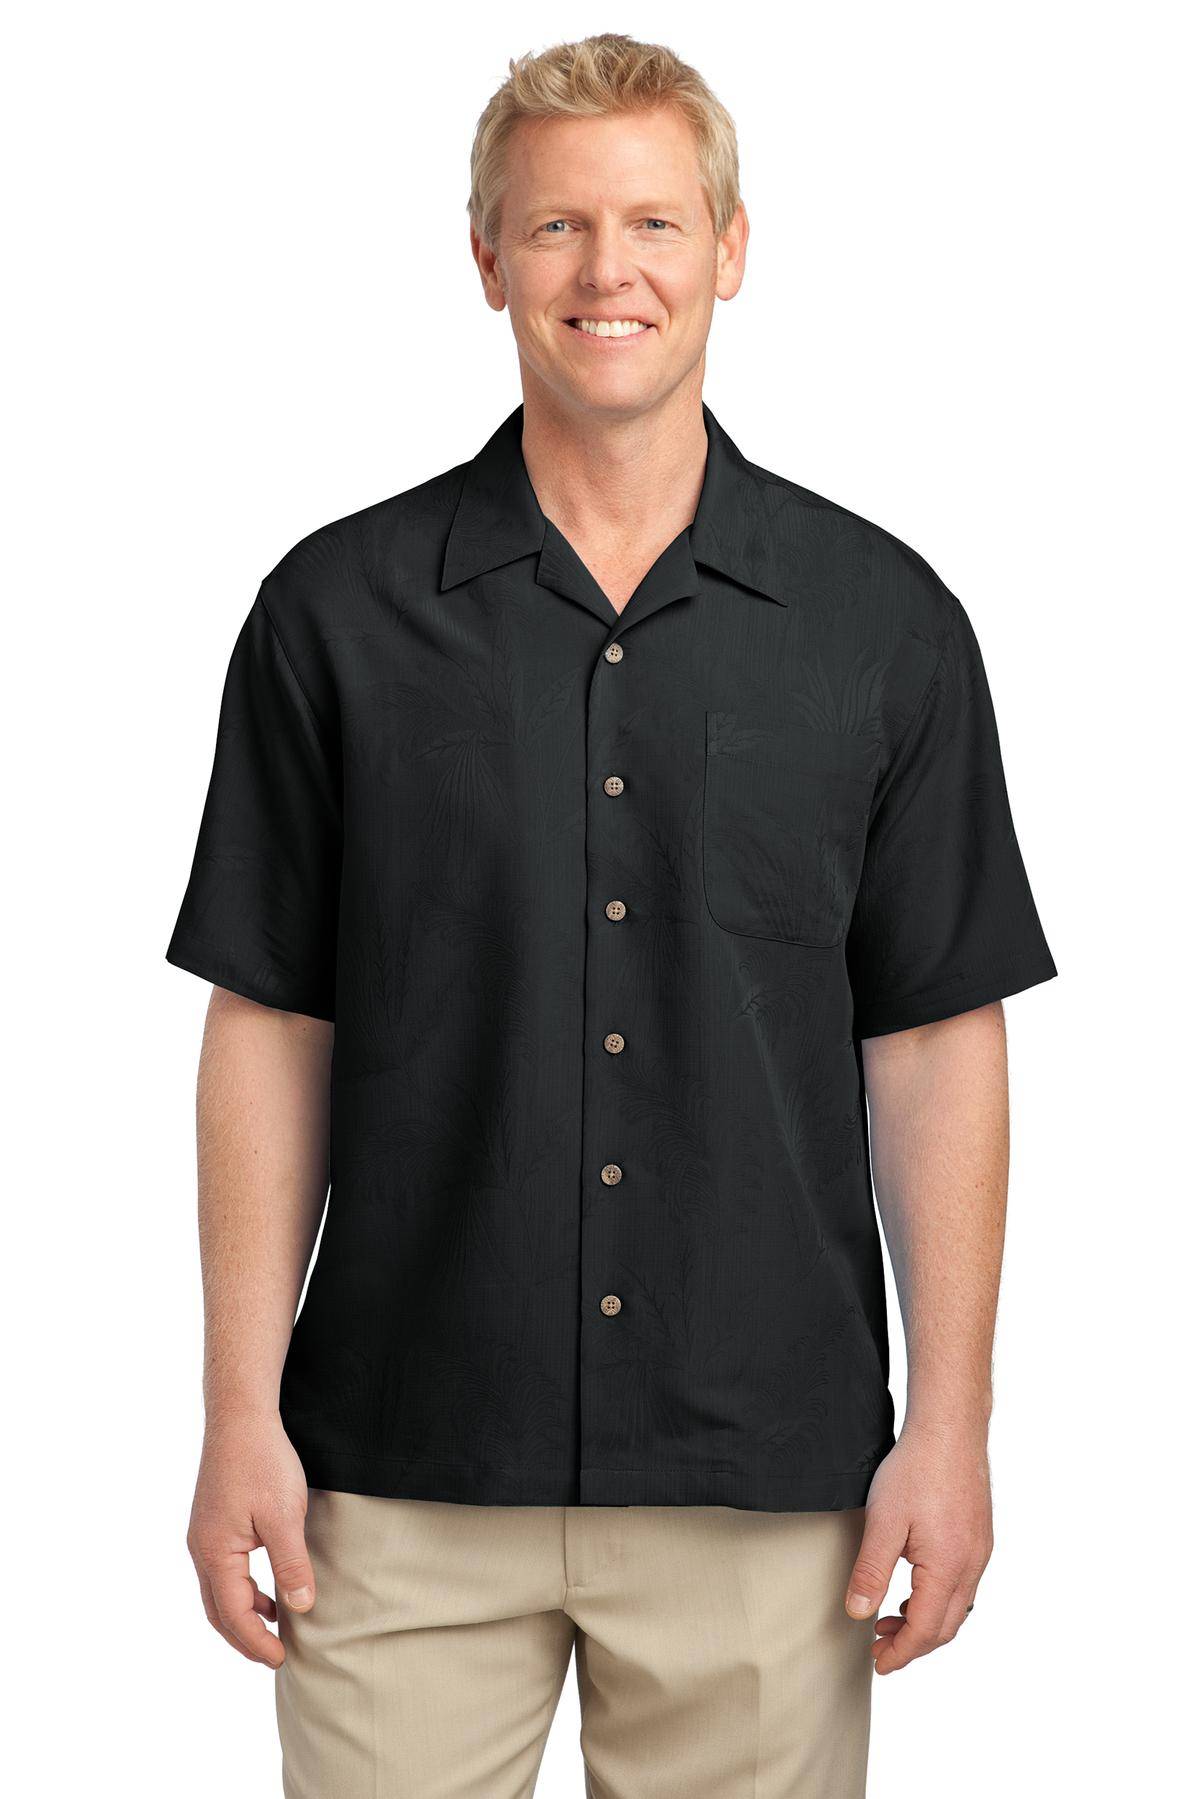 Port Authority S536 Patterned Easy Care Camp Shirt - ApparelShopUSA